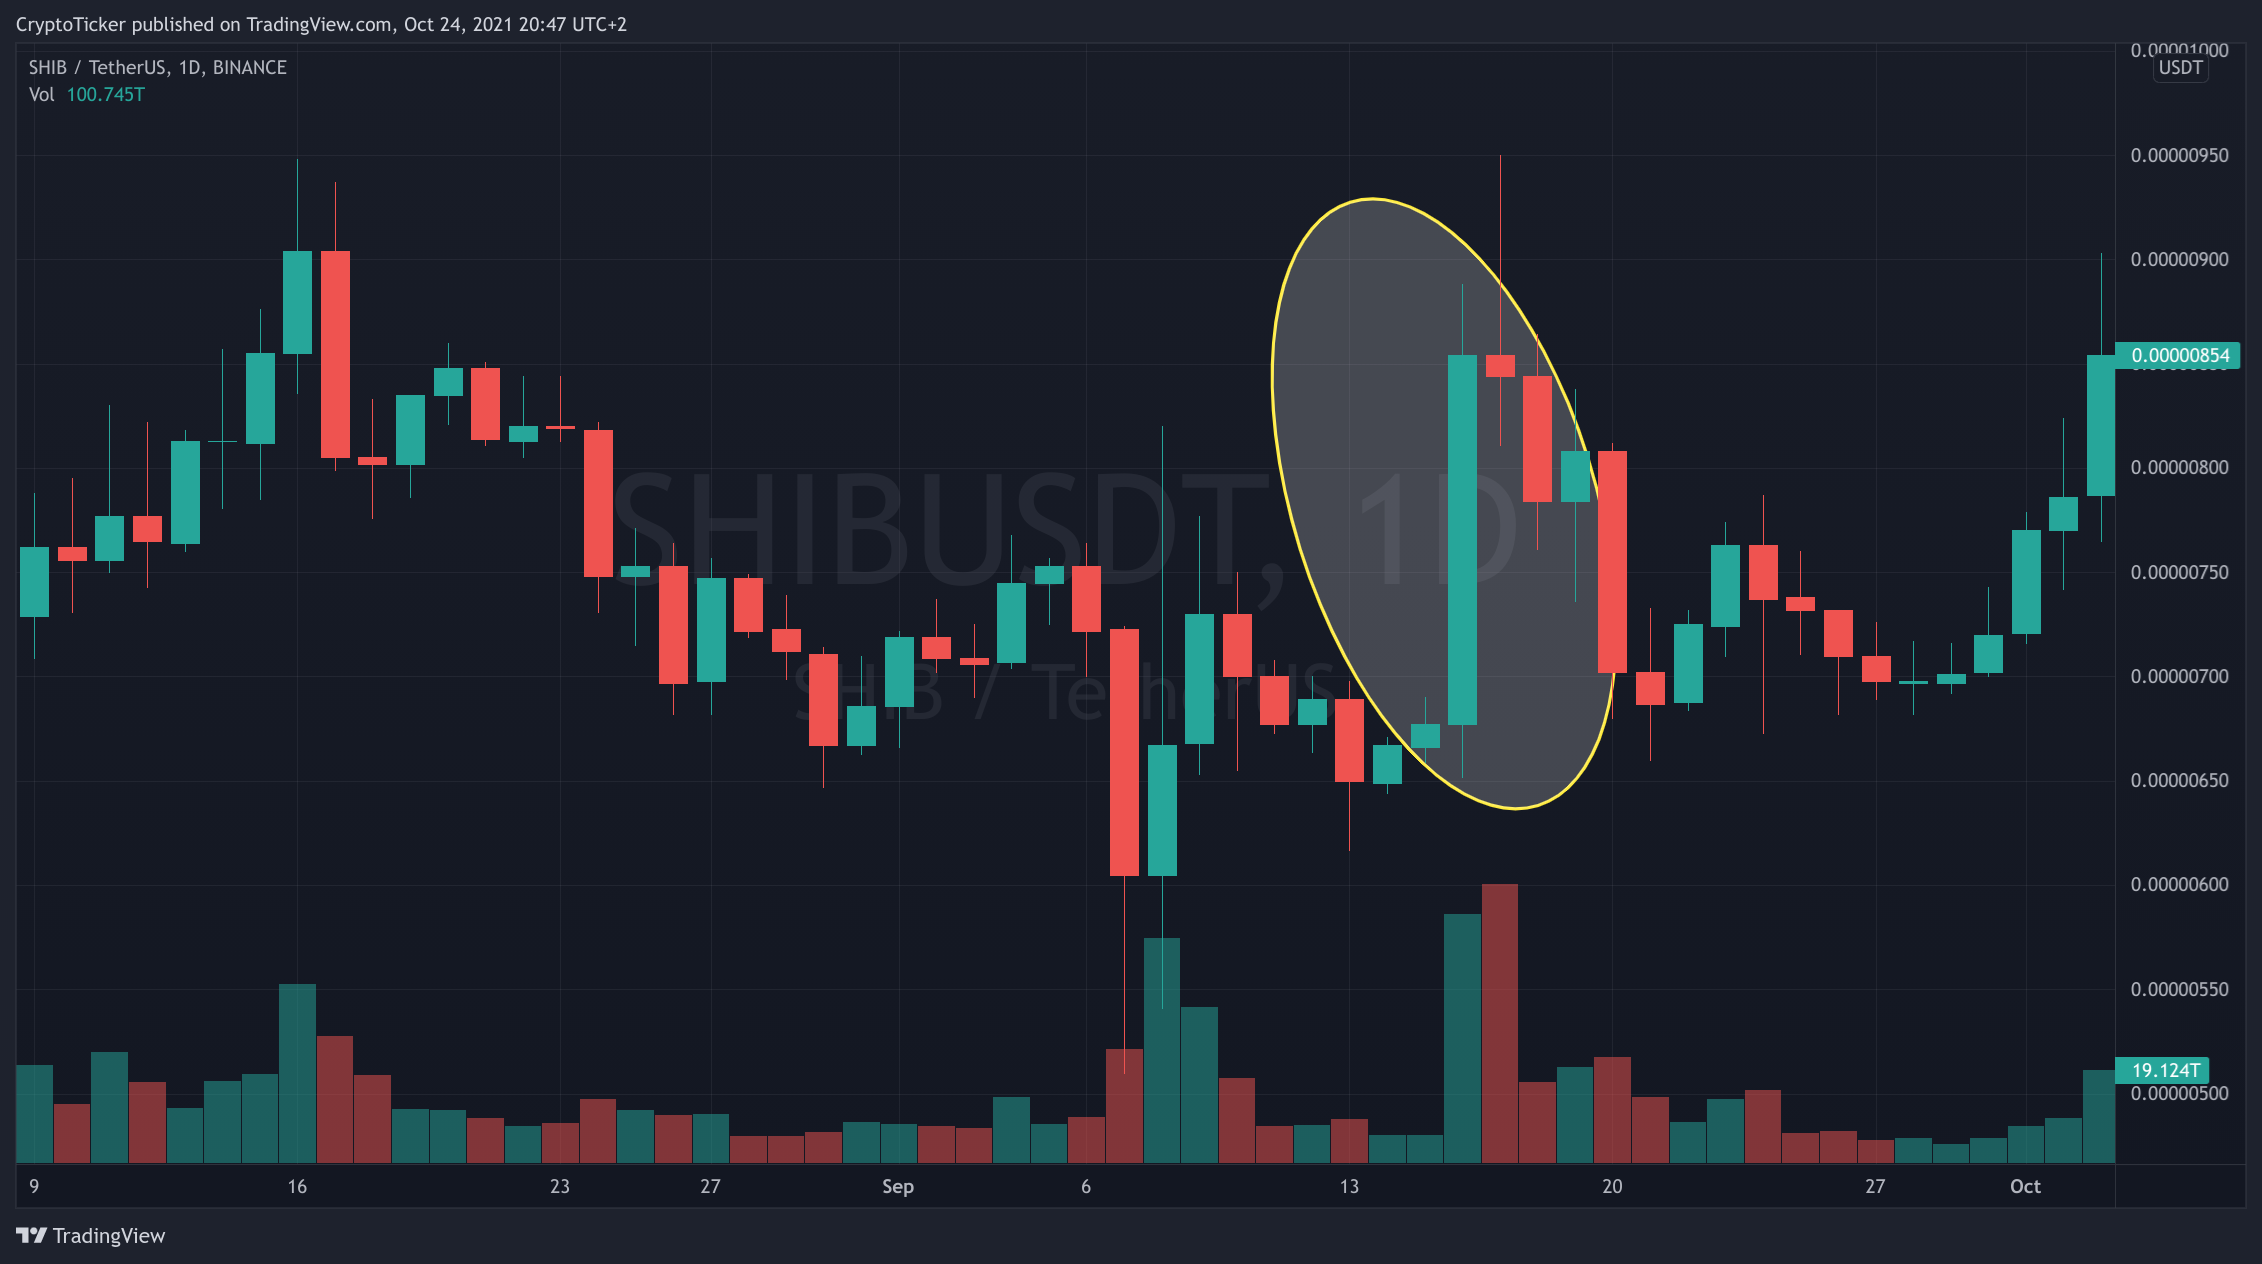 SHIB/USDT 1-day chart showing the Coinbase listing boom